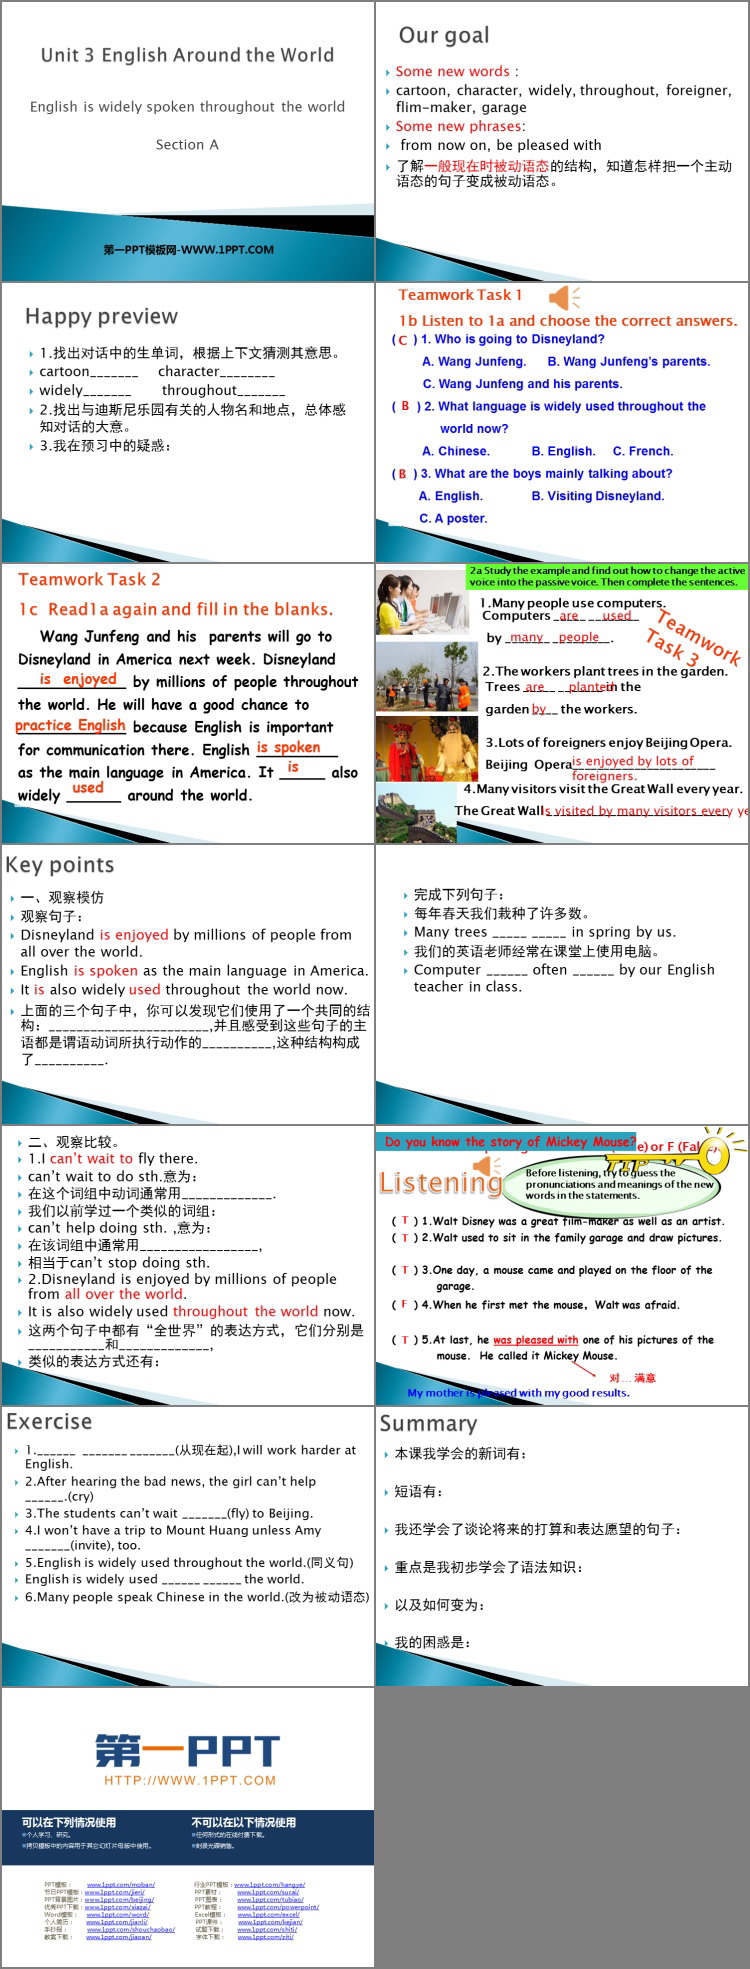 《English is widely spoken throughout the world》SectionA PPT课件-预览图02